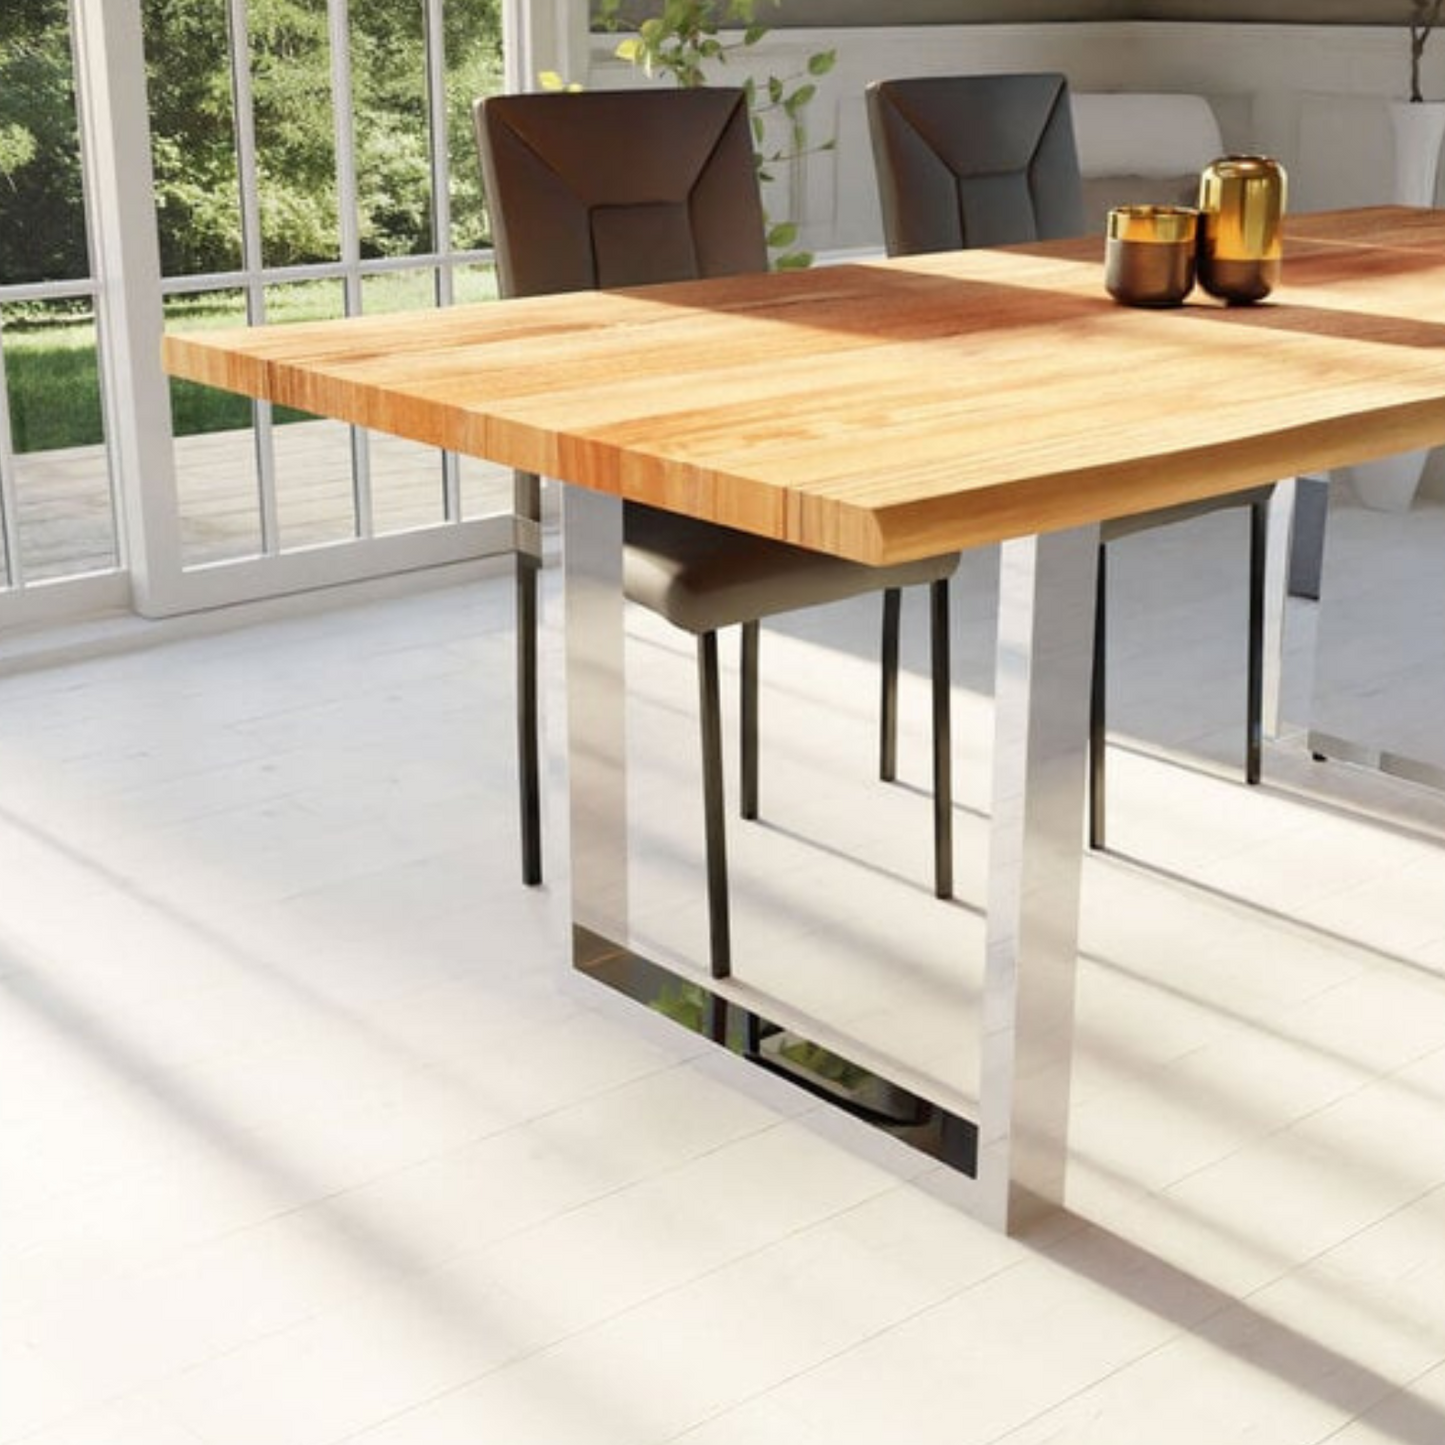 My prime furniture U table legs are a beautiful and durable option for your dining room. They are made from steel and offer the perfect balance between resistance and durability.